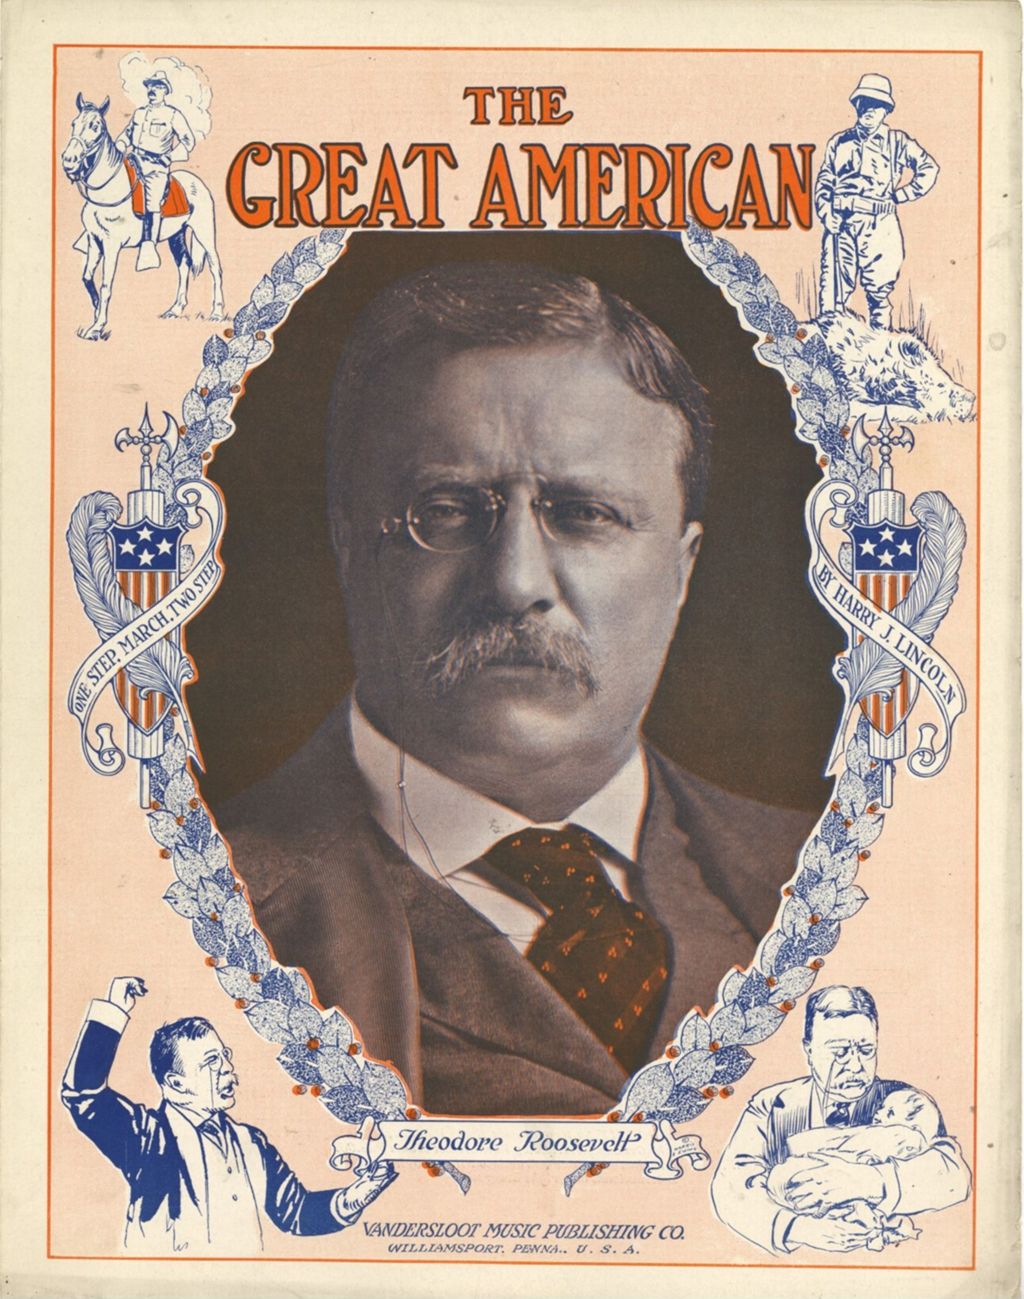 Great American (Theodore Roosevelt)